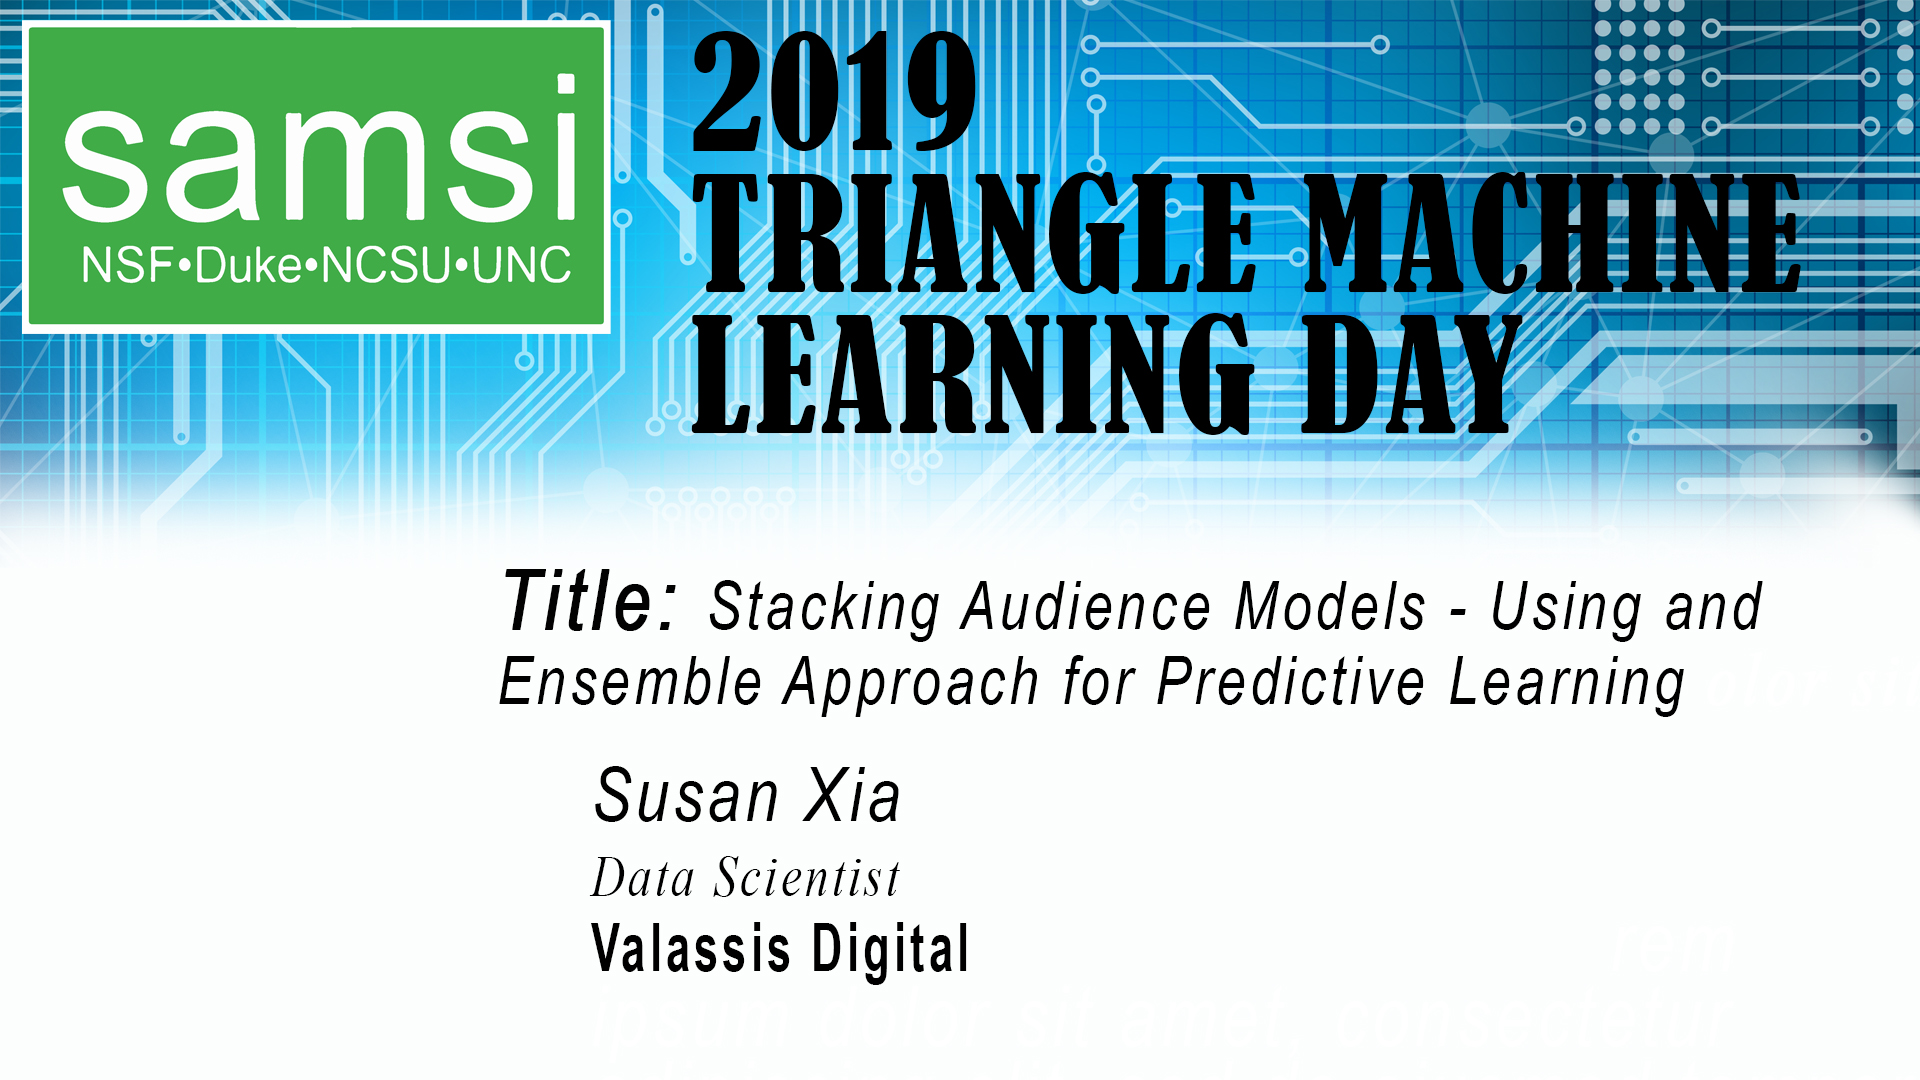 Deep Learning: Triangle Machine Learning Day - Stacking Audience Models -- Using an Ensemble Approach for Predictive Modeling, Susan Xia Thumbnail